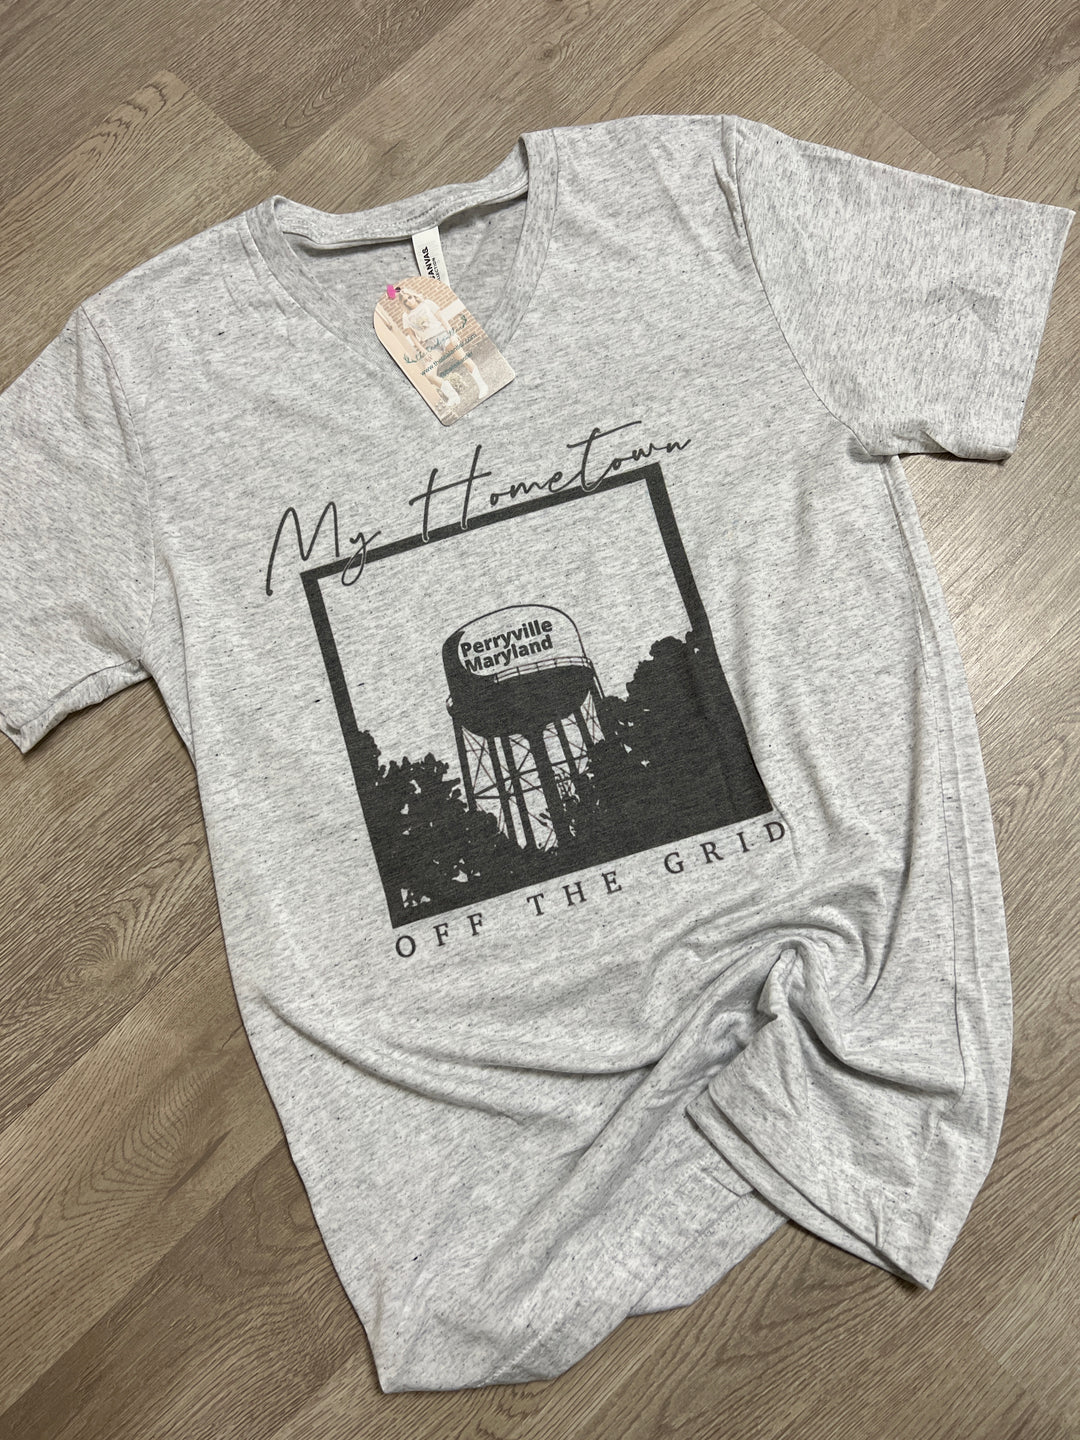 My Hometown Tee - The Teal Antler Boutique